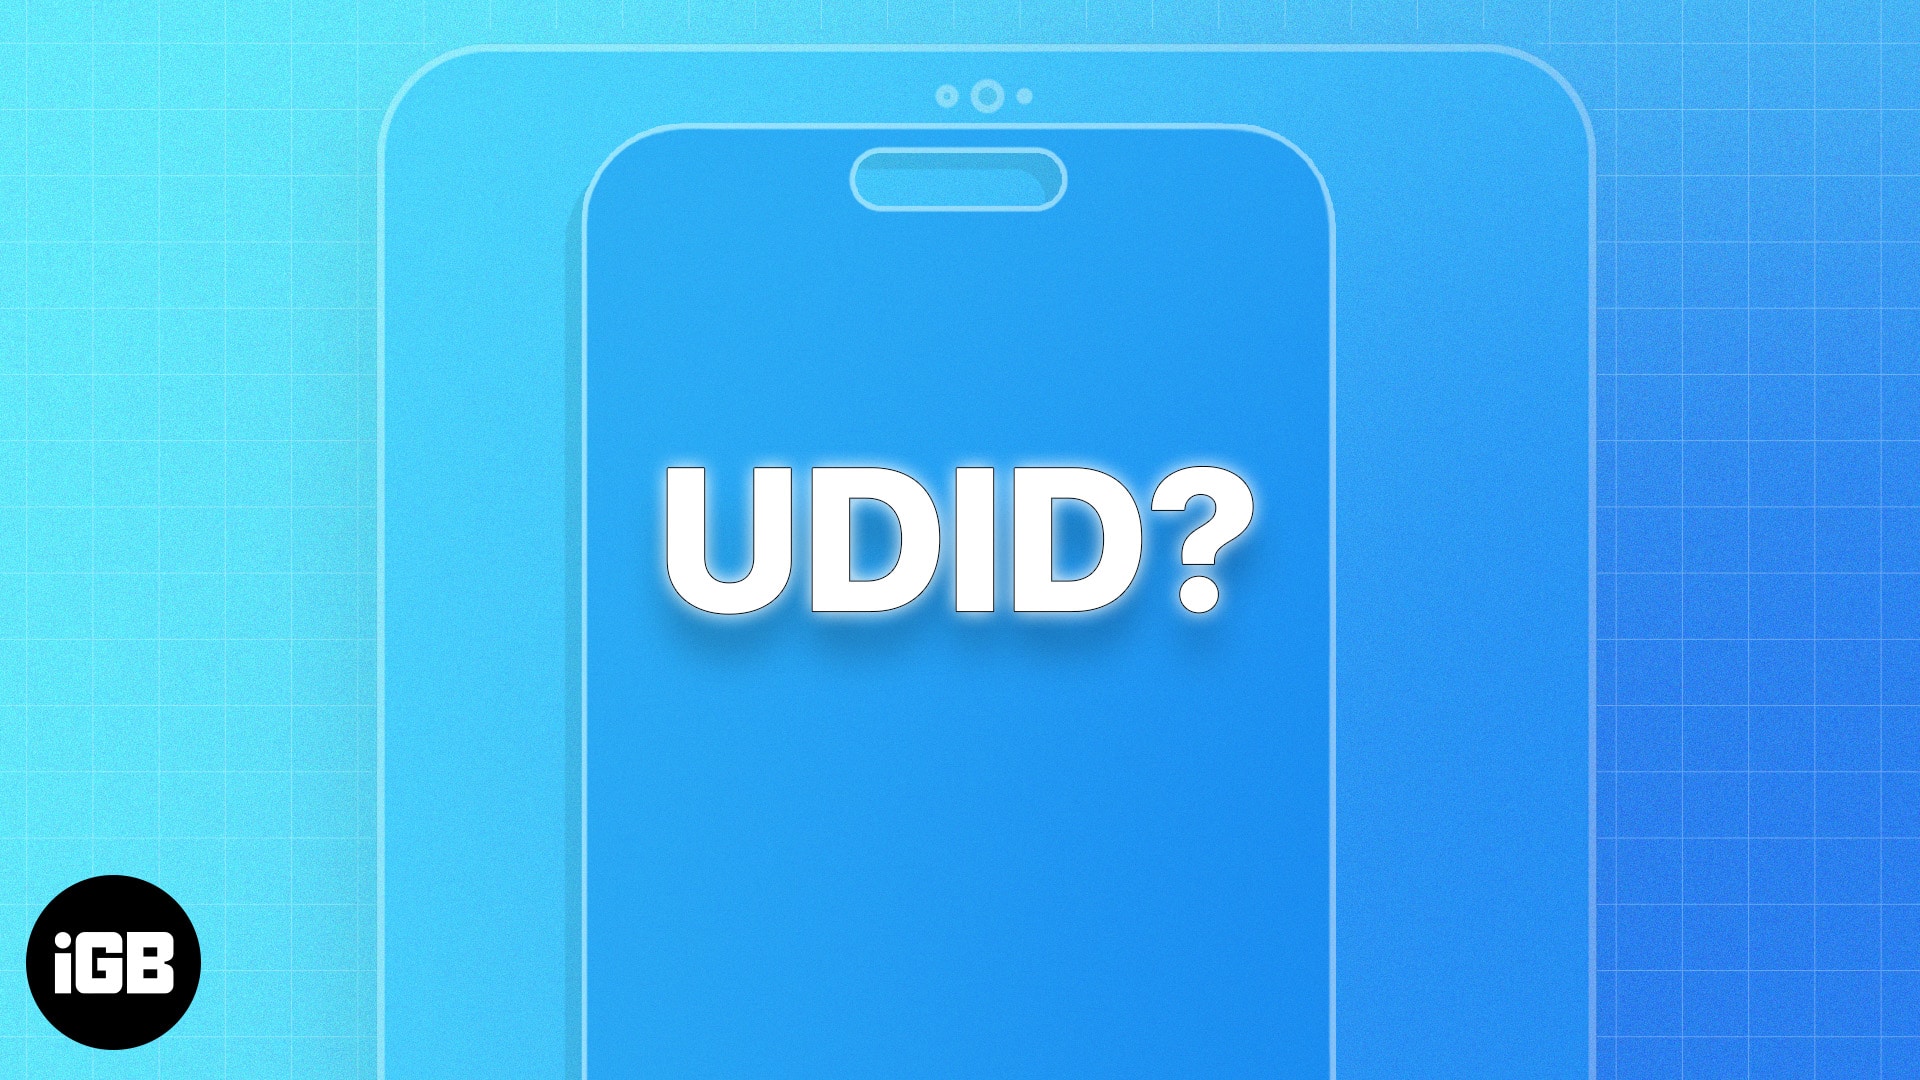 How to find UDID of iPhone or iPad